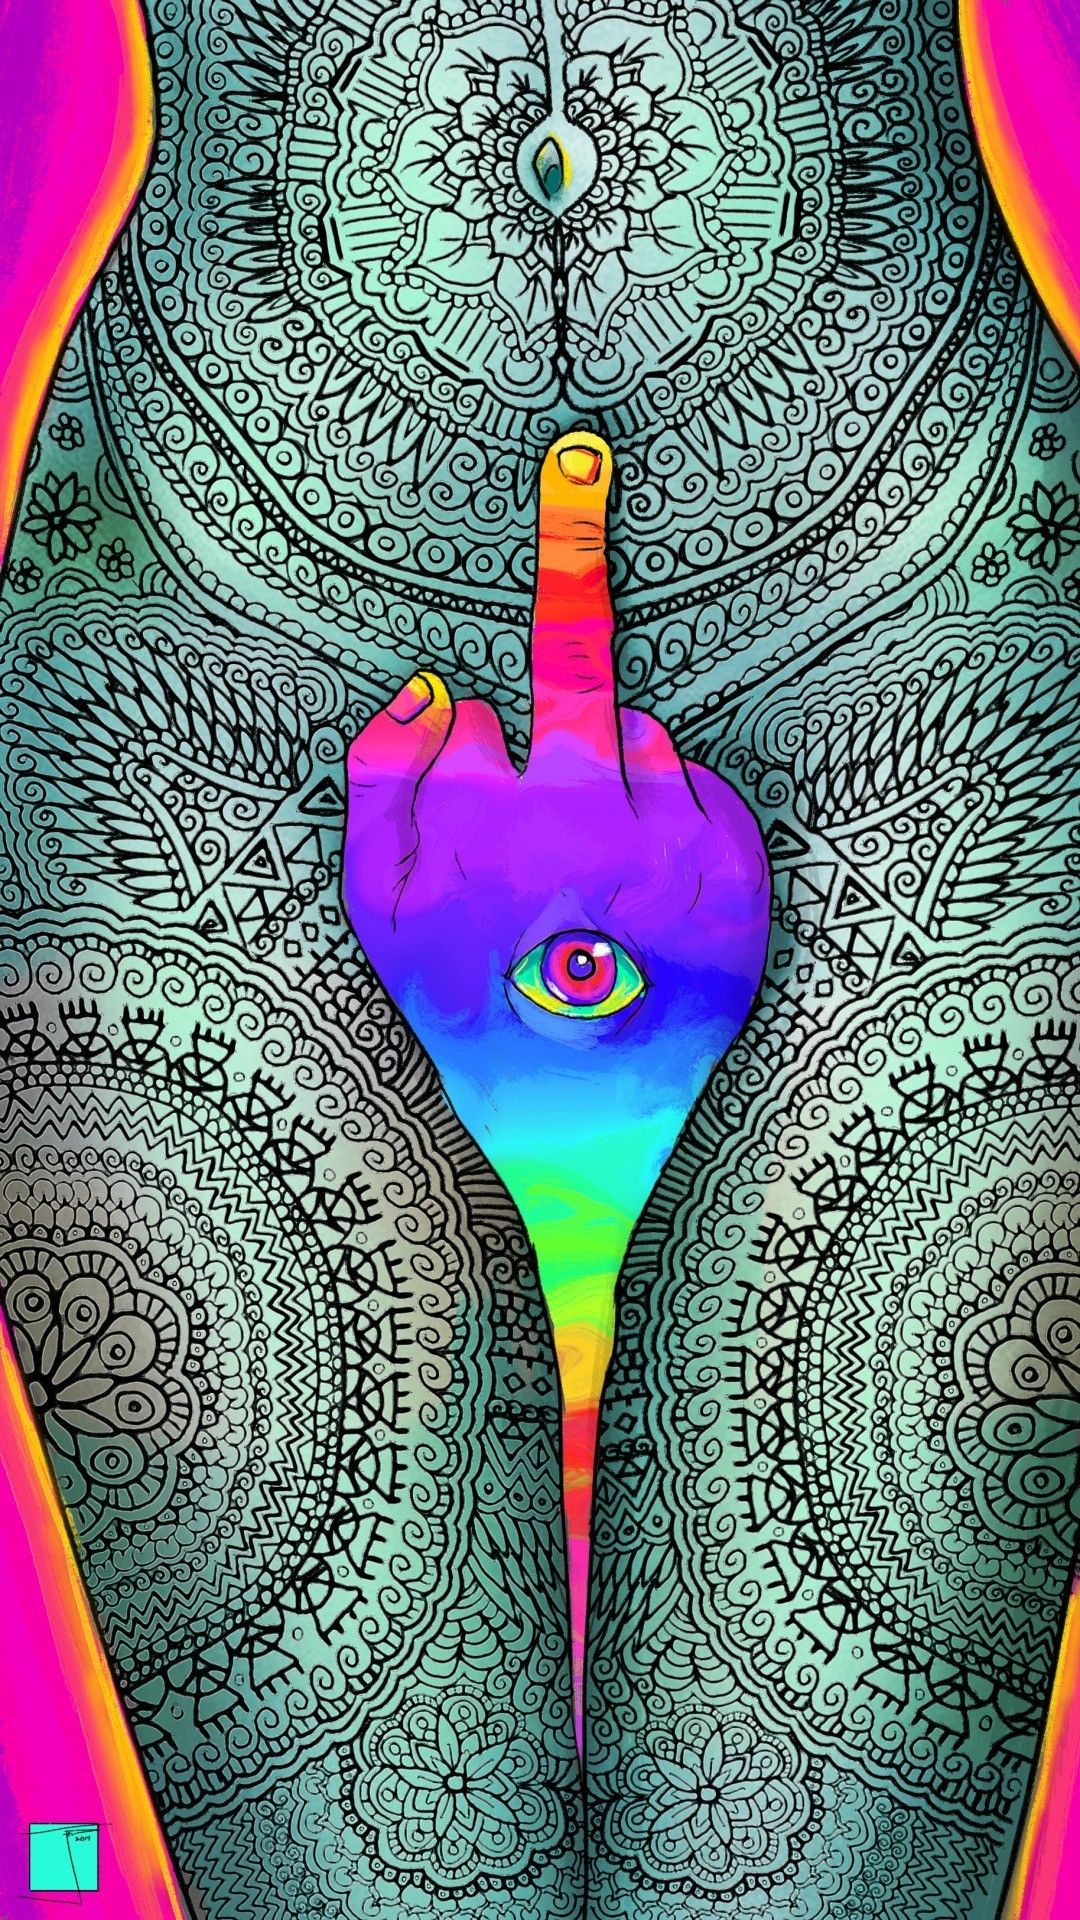 4K Trippy Art Wallpaper PsychedelicAmazoncomAppstore for Android